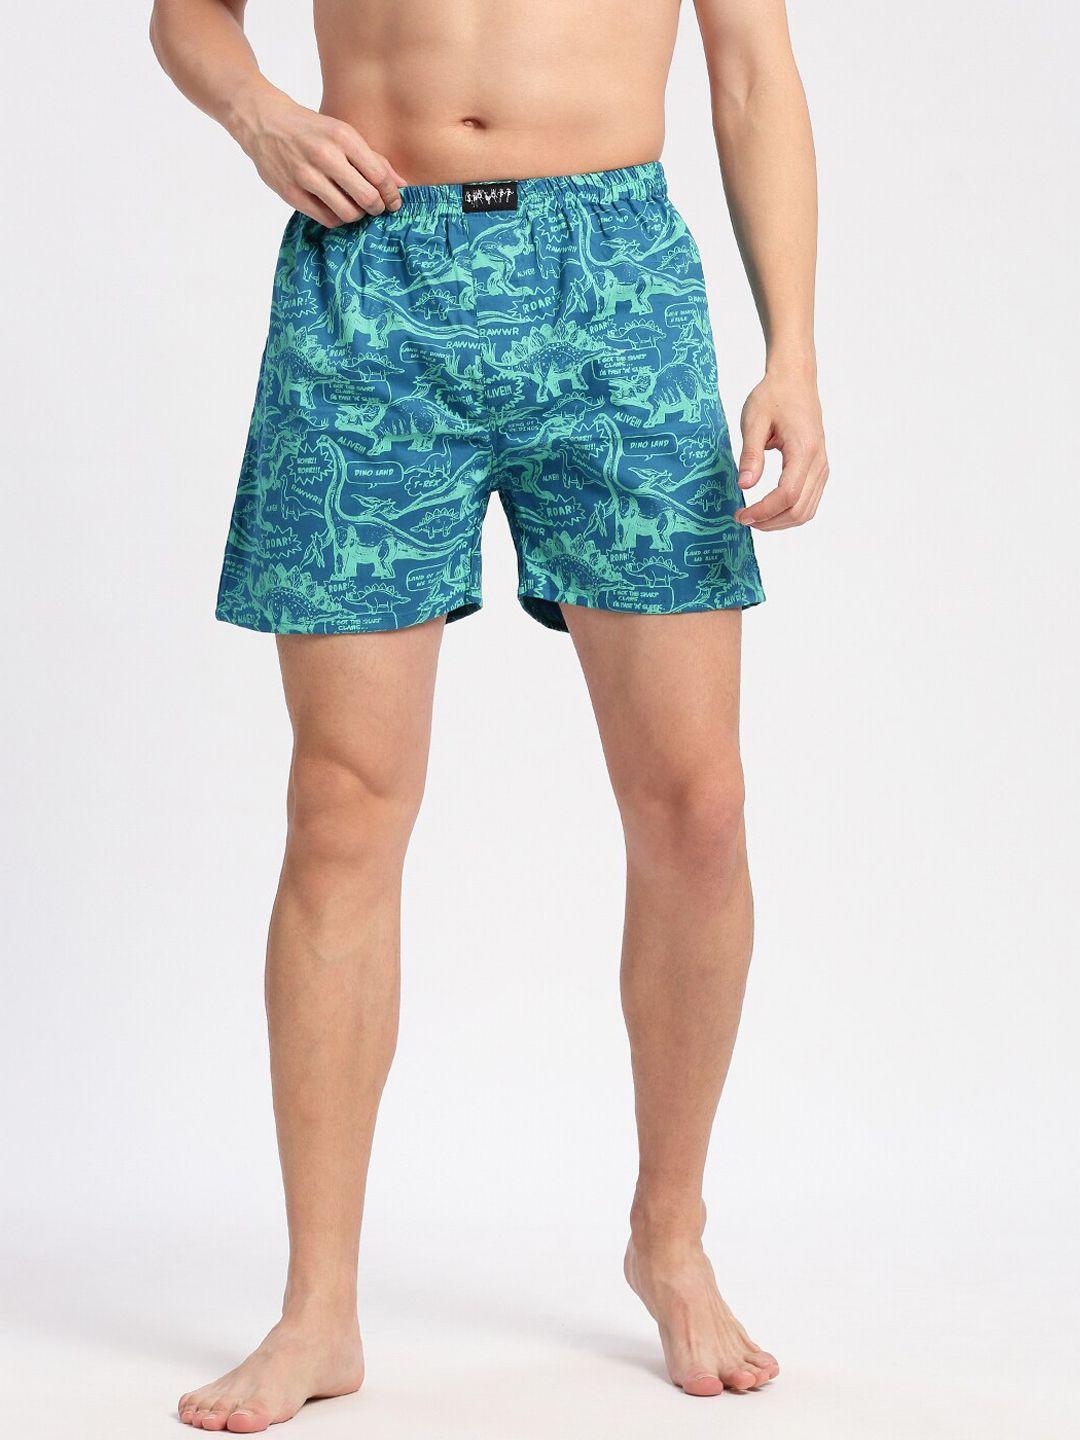 showoff-dino-printed-pure-cotton-boxers-am-141-25_turquoiseblue